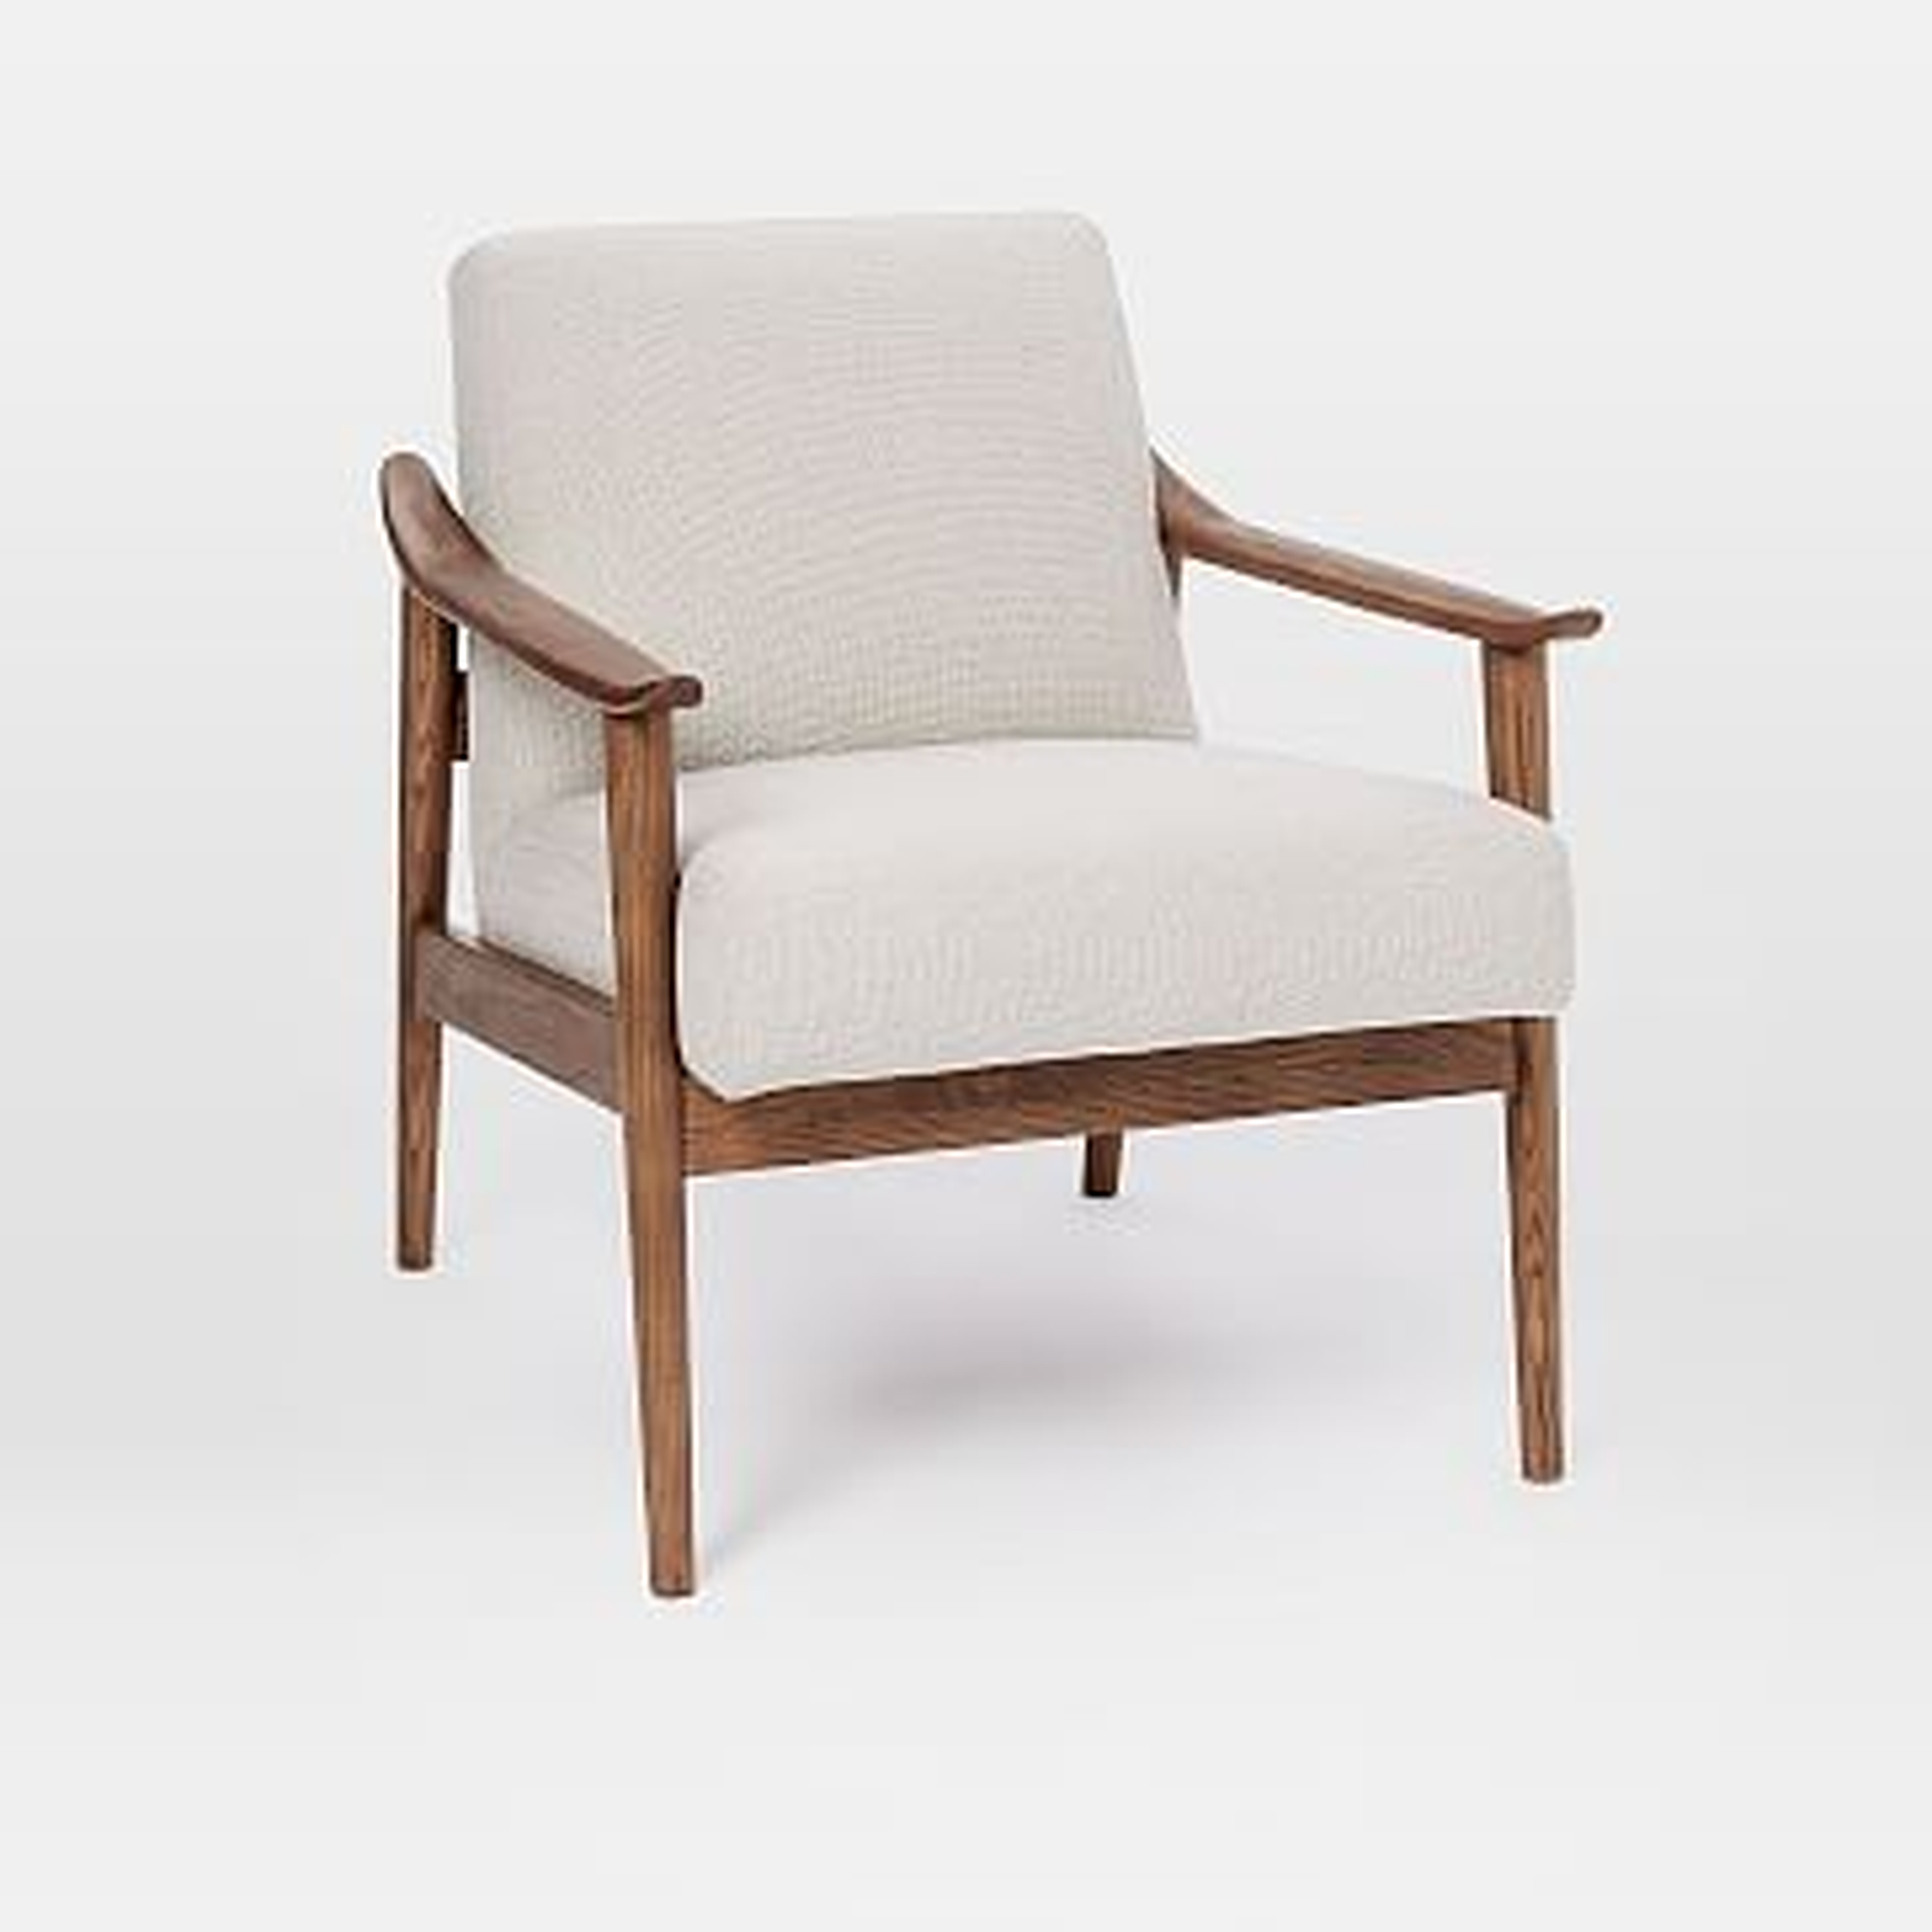 Mid, Century Show Wood Chair, Stone Chunky Basketweave Pecan, White Glove - West Elm